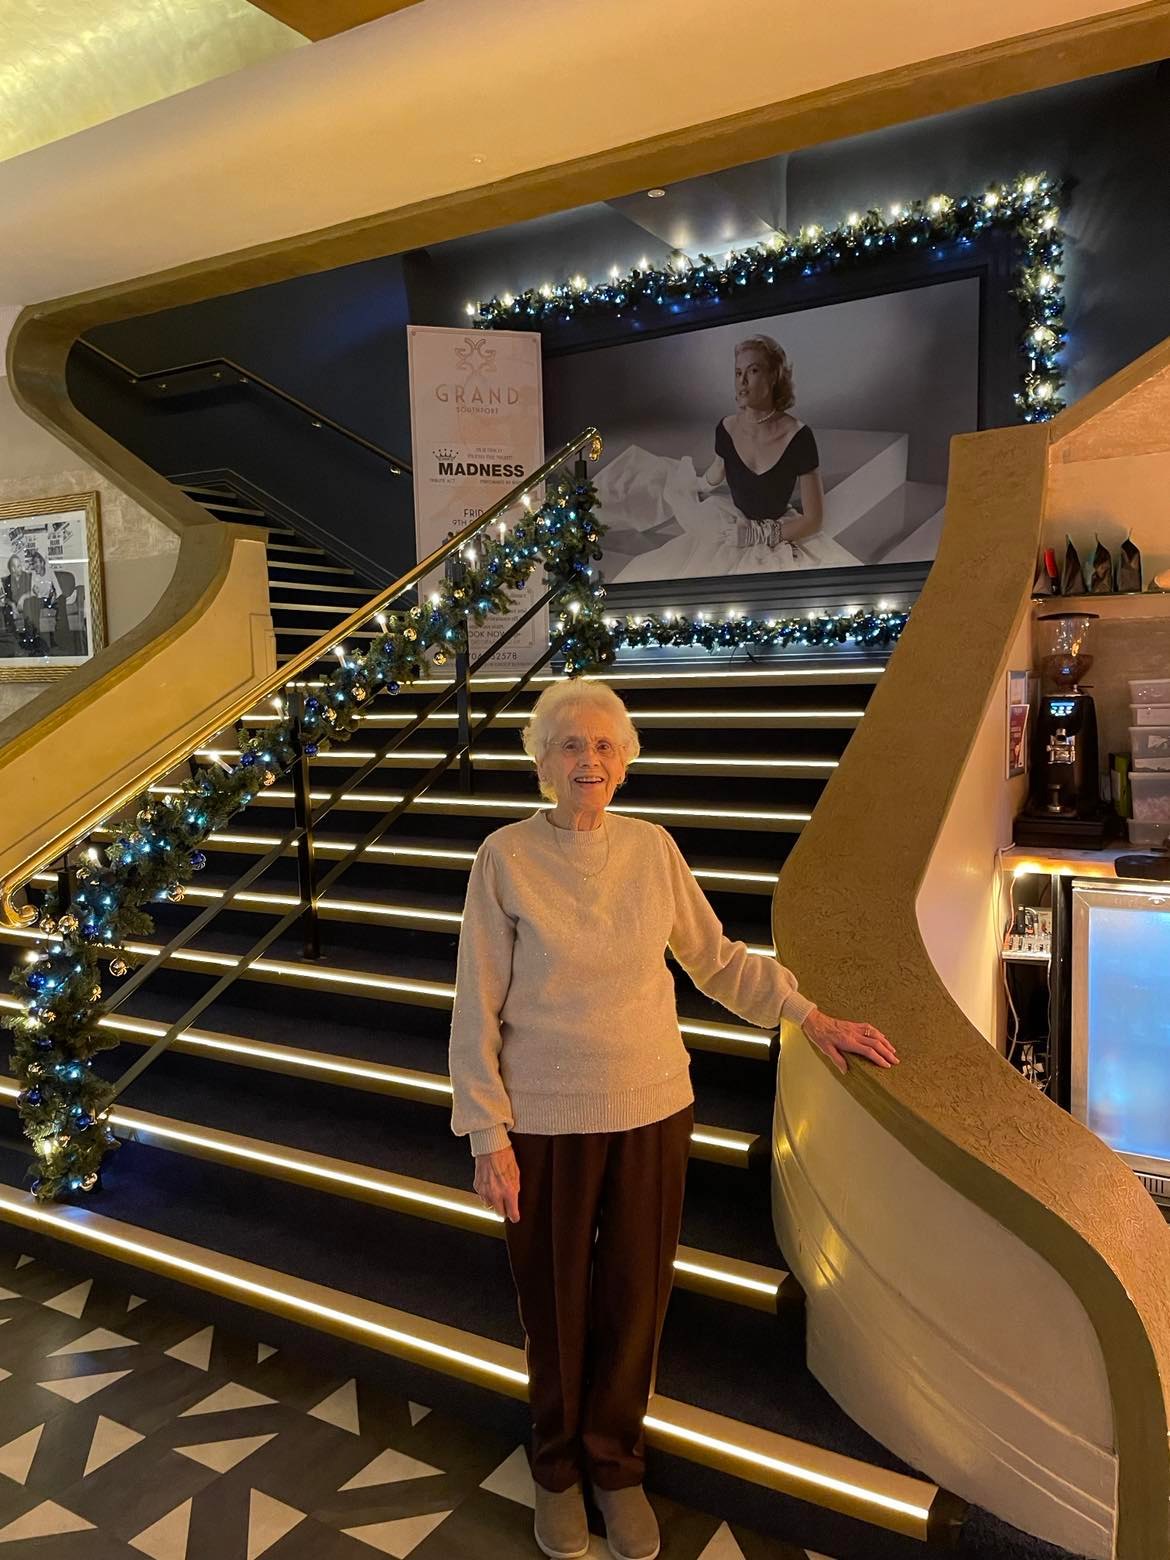 Vera Guest aged 94 who worked as an usherette at The Grand in Southport during World War Two has been treated to a VIP afternoon tea there. Photo by Steve Ashcroft